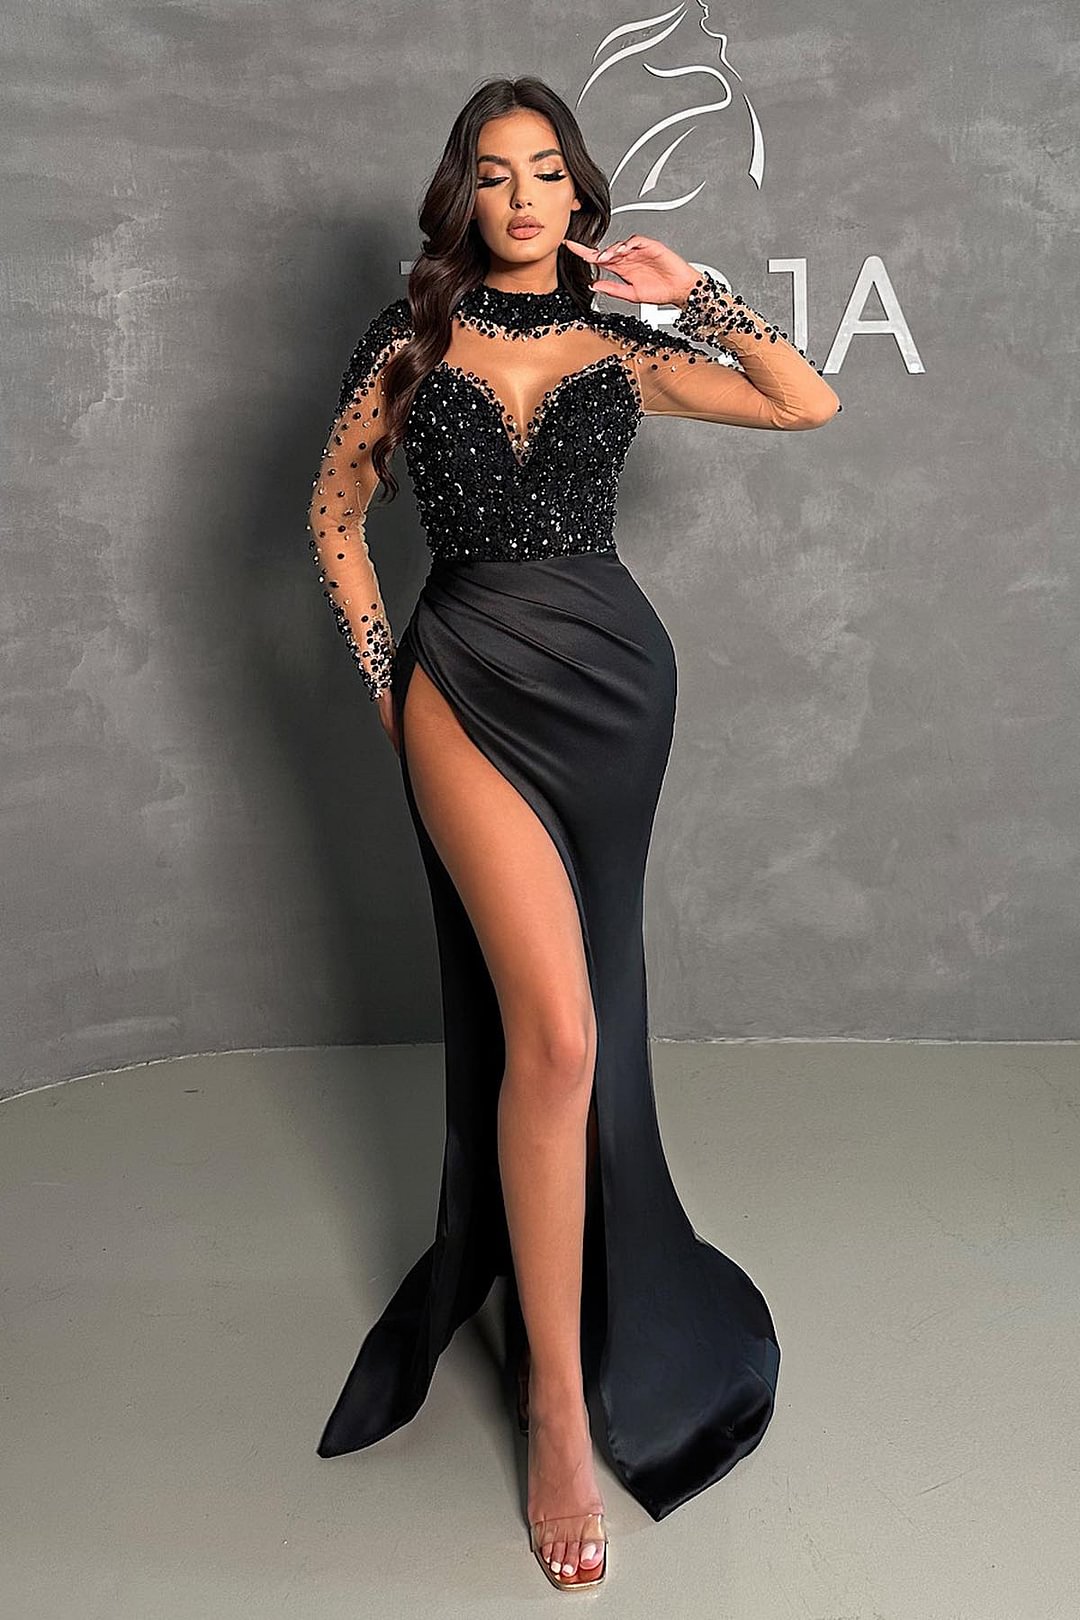 Chic Black Long Sleeves Mermaid Evening Dress Split With Sequins Beads - lulusllly